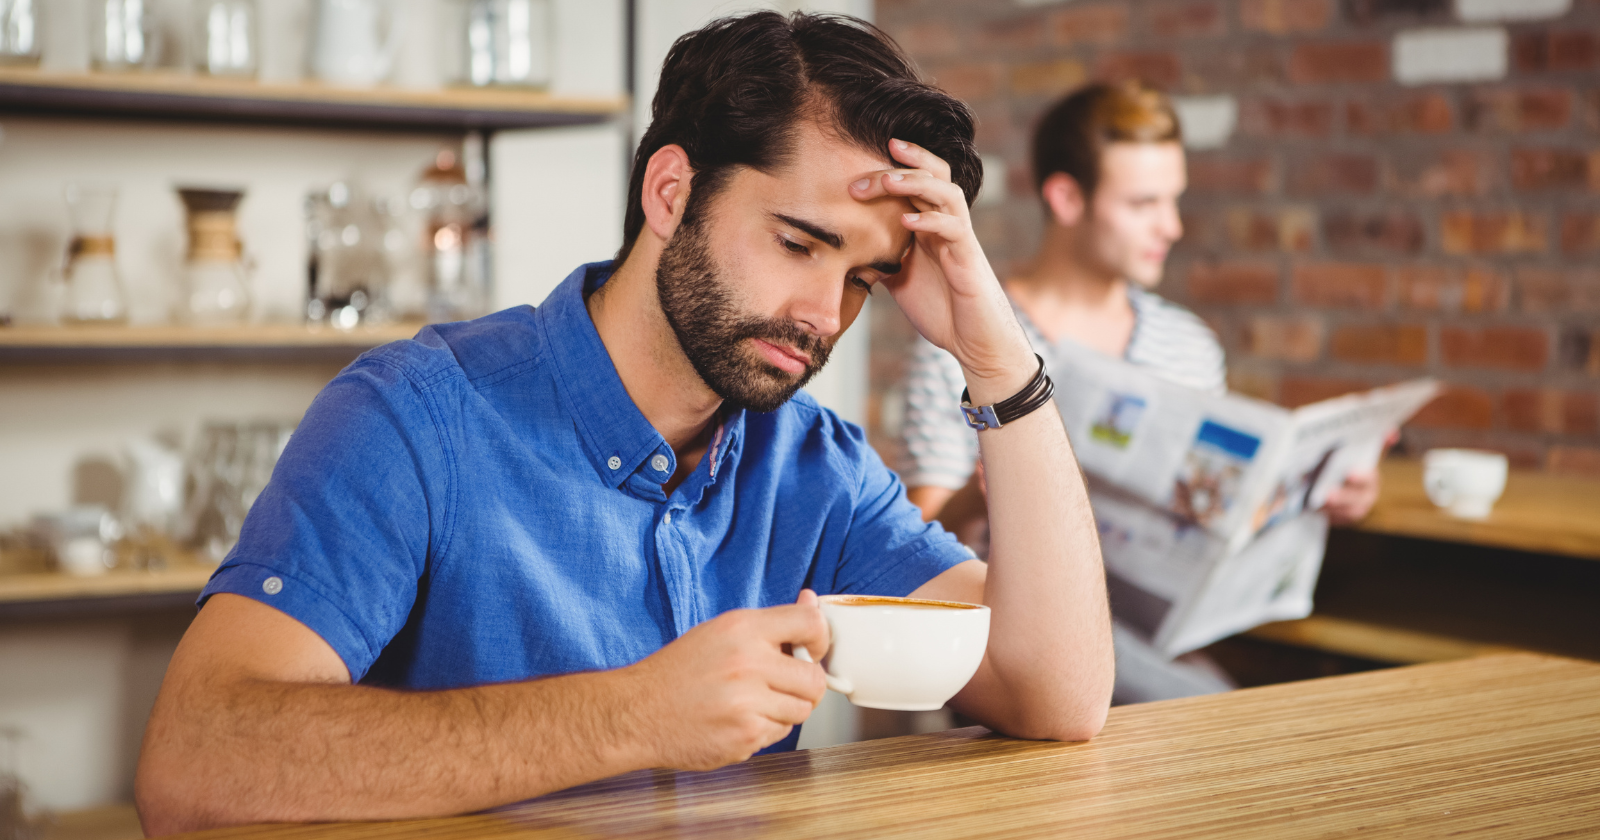 warning signs a man has low self esteem If someone does these 12 things, they're highly insecure